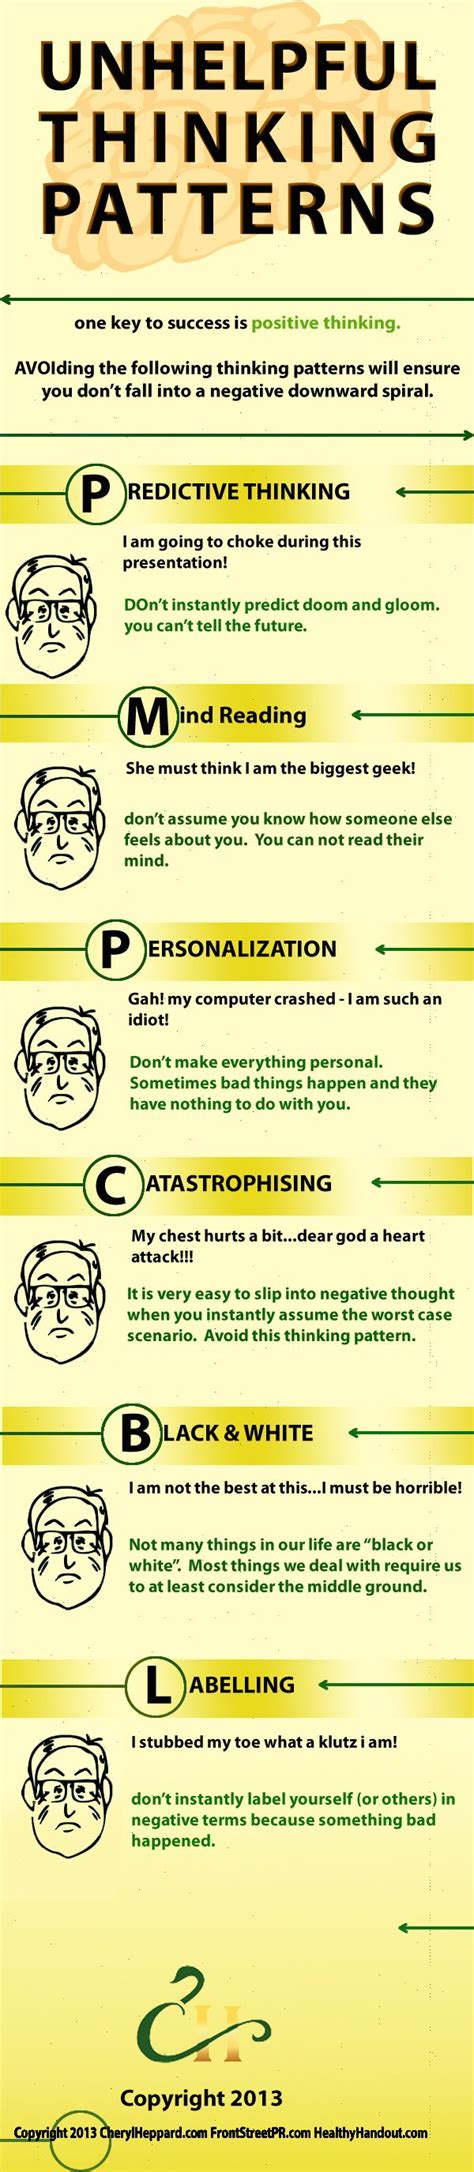 Unhelpful Thinking Patterns Infographic By Cheryl Heppard